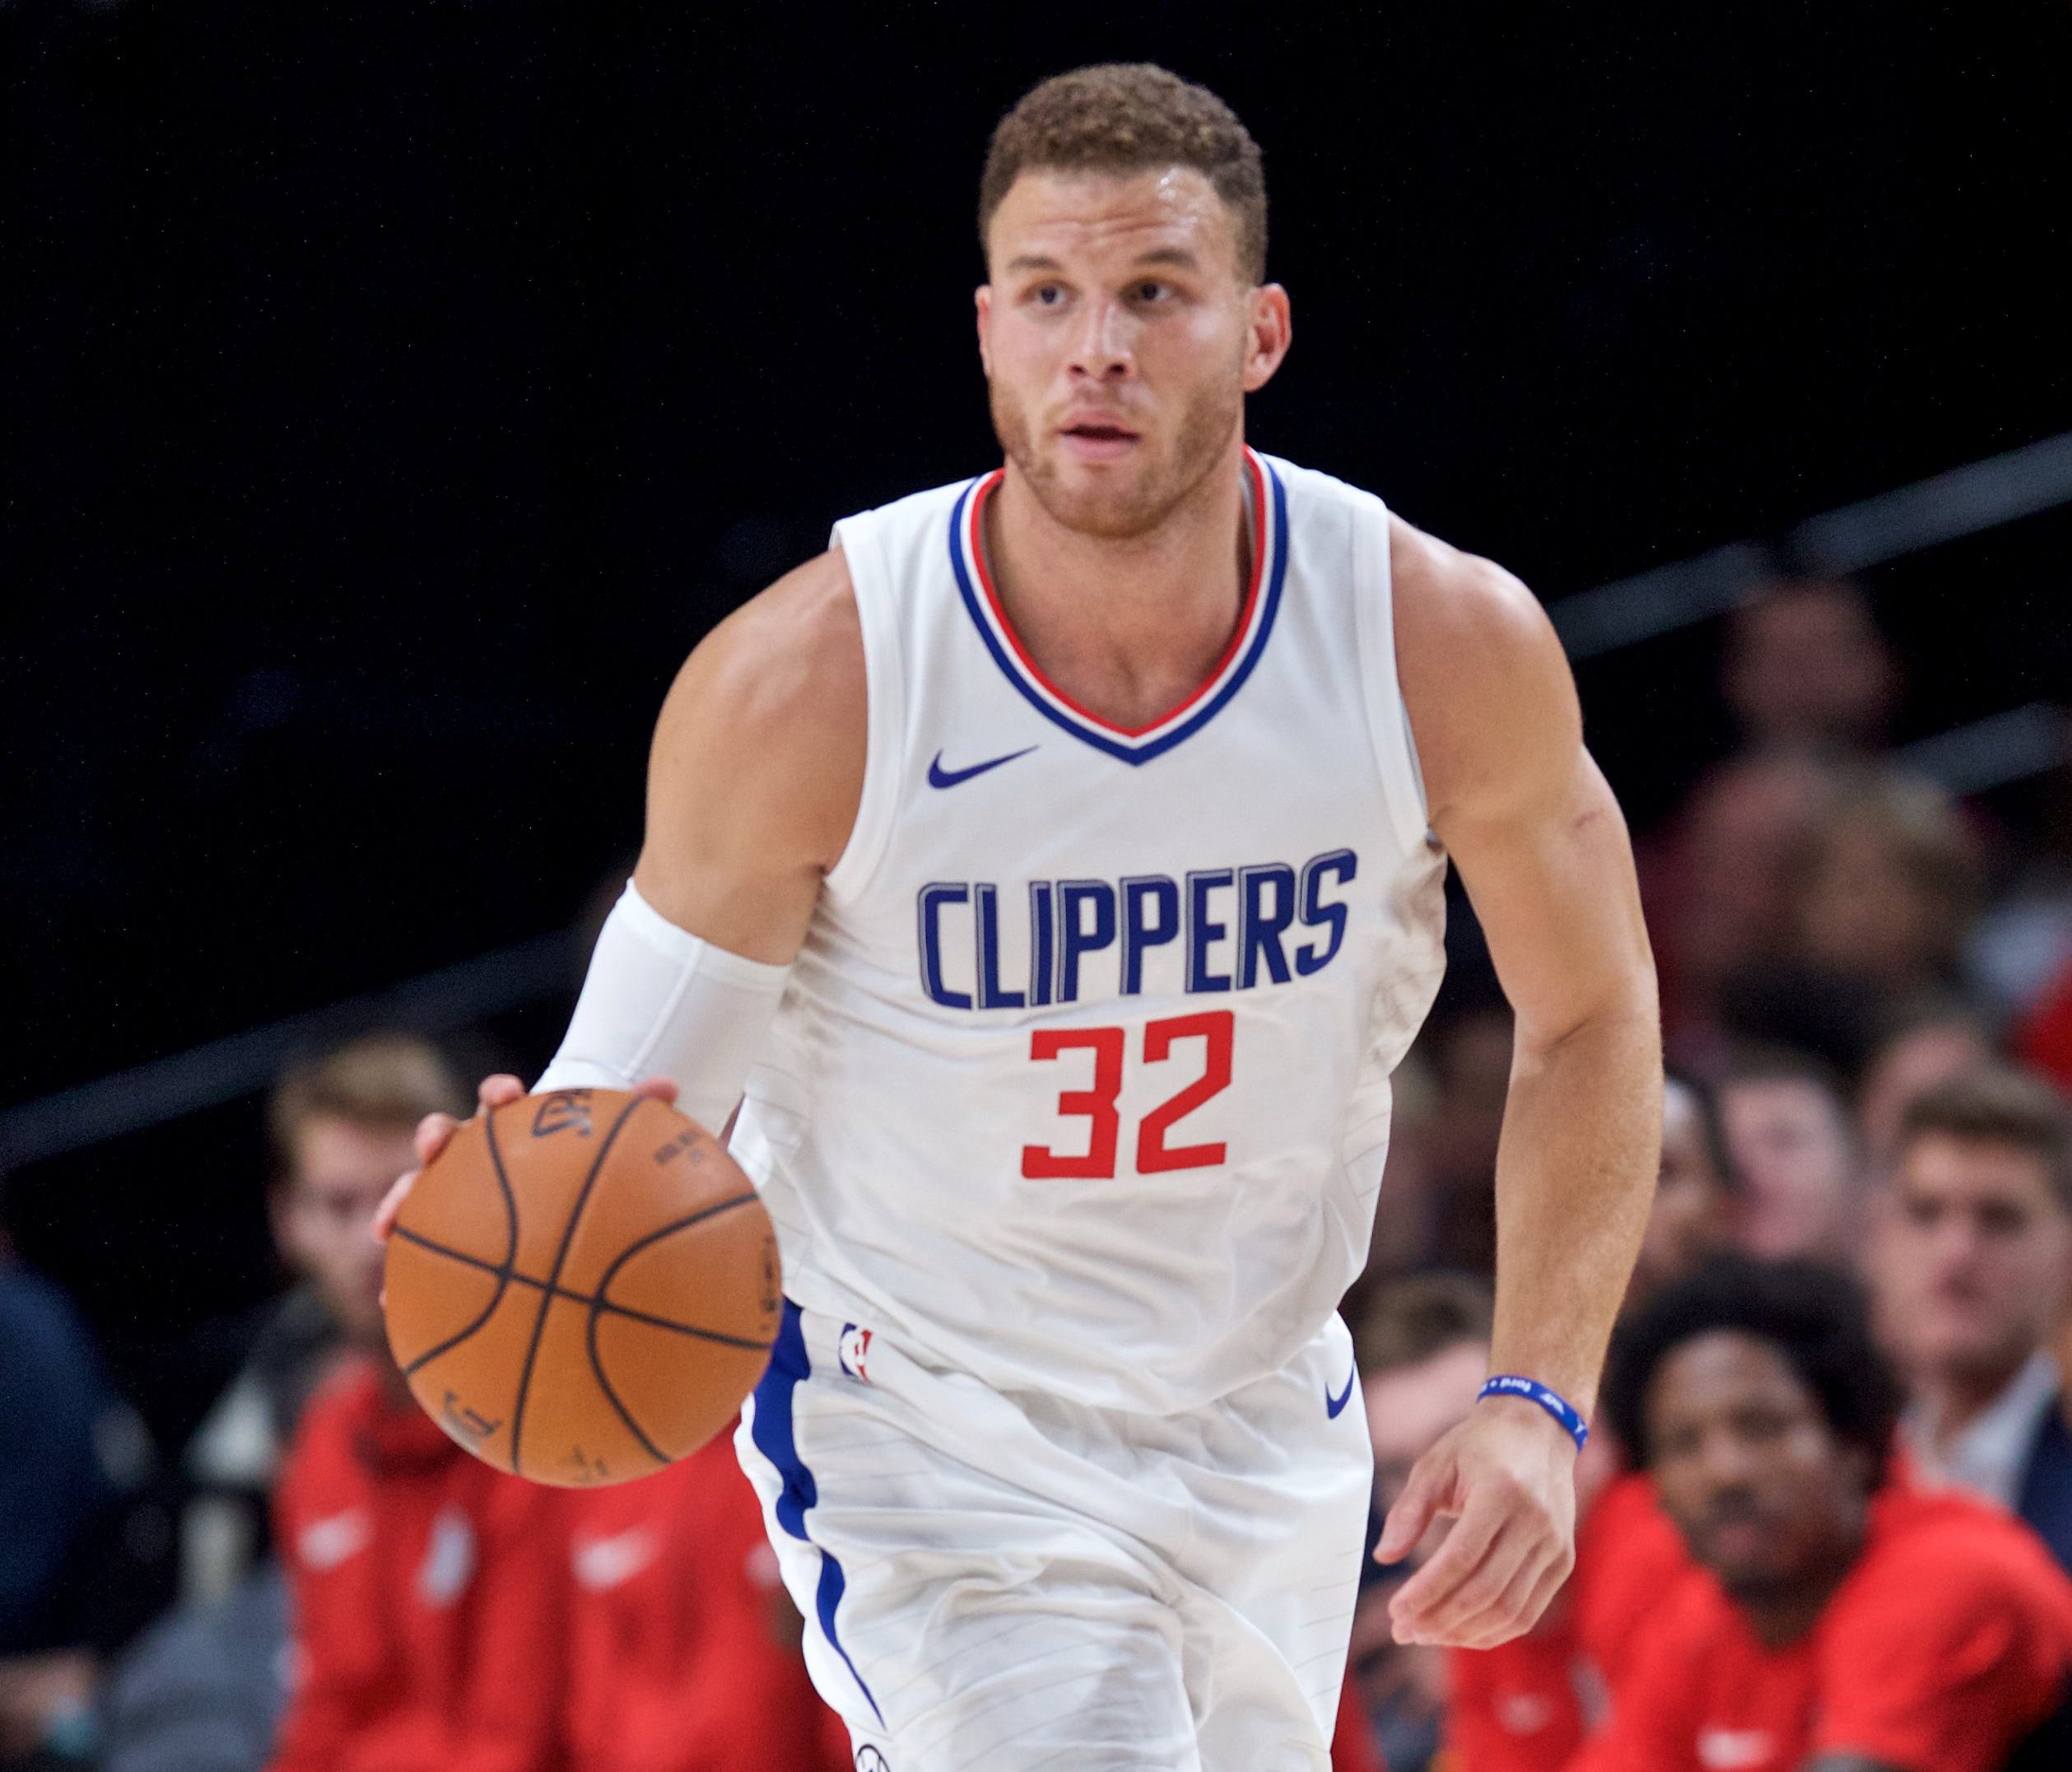 LA Clippers forward Blake Griffin (32) brings the ball up court against the Portland Trail Blazers during the first quarter at the Moda Center.